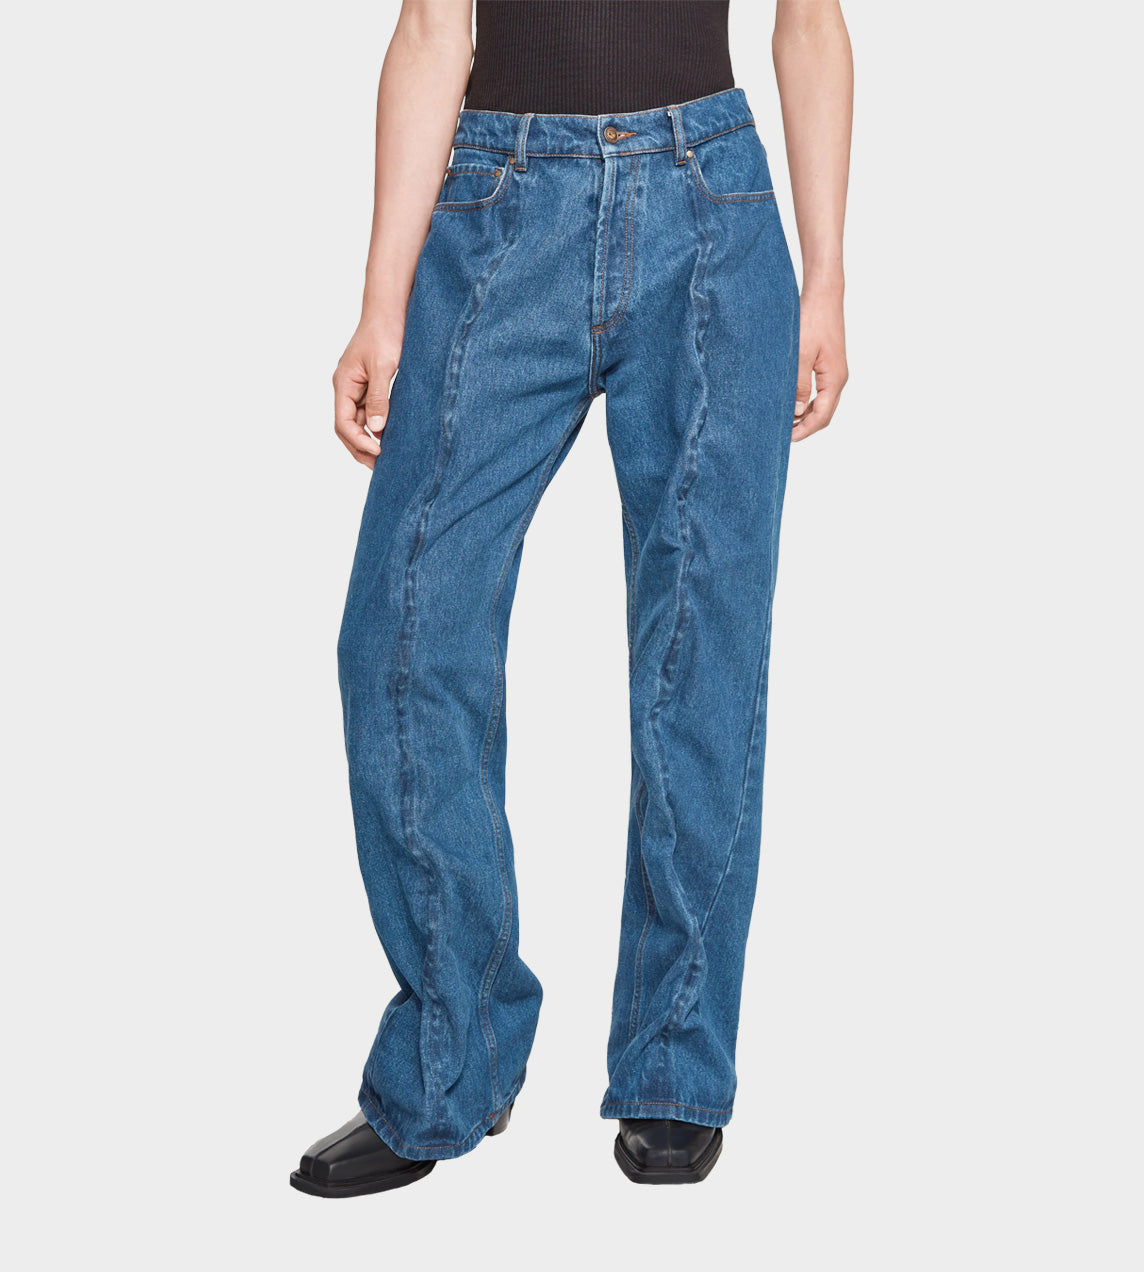 Y/Project - Classic Wire Jeans Navy